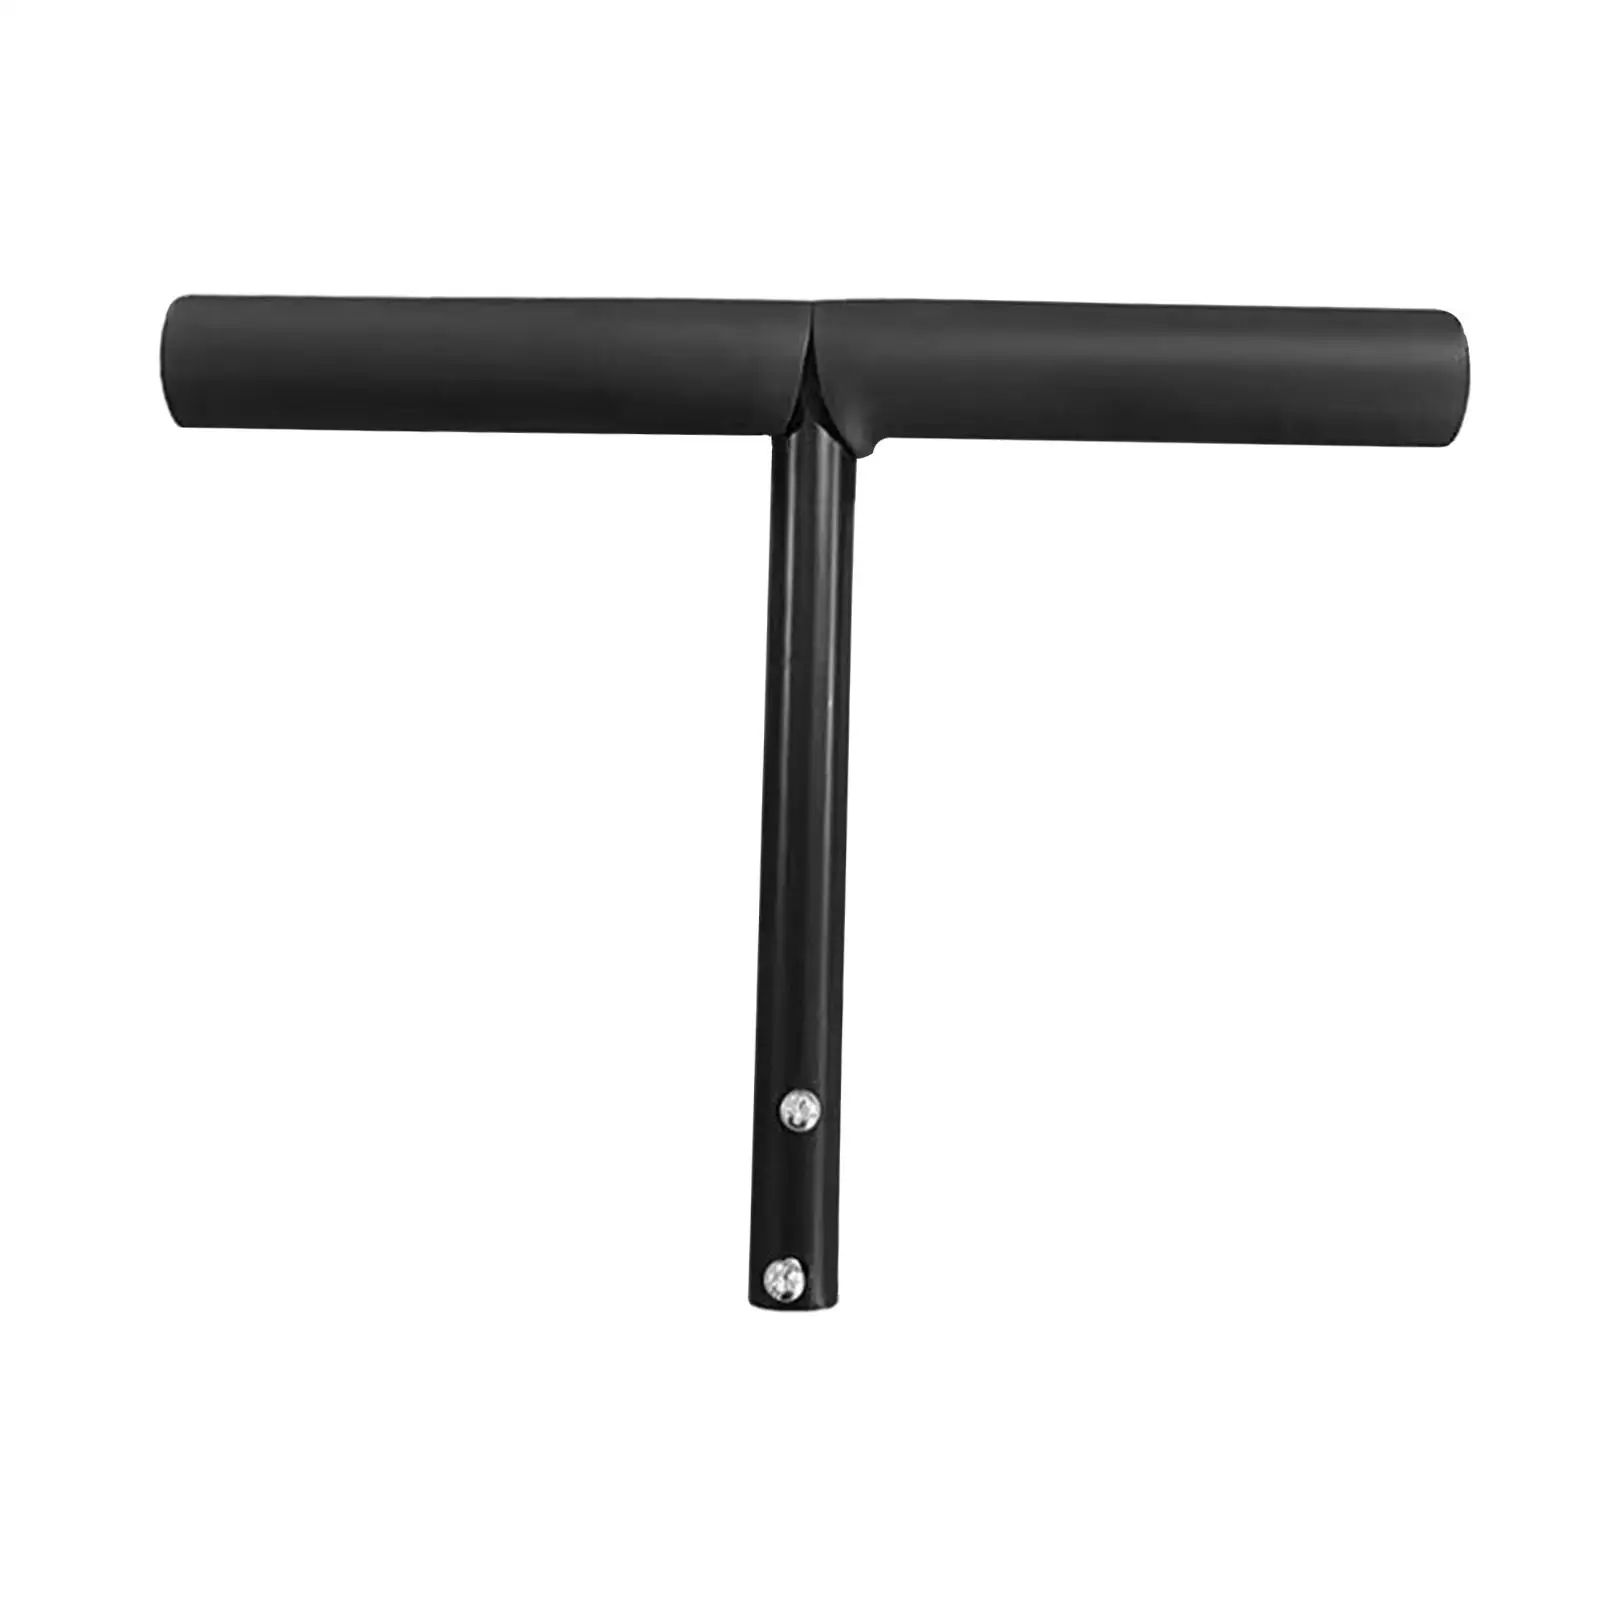 T Shaped Push Handle Bar Kids Tricycle Accessories Practical Easy to Install Sturdy Replacement Durable for Travel Outdoor Home